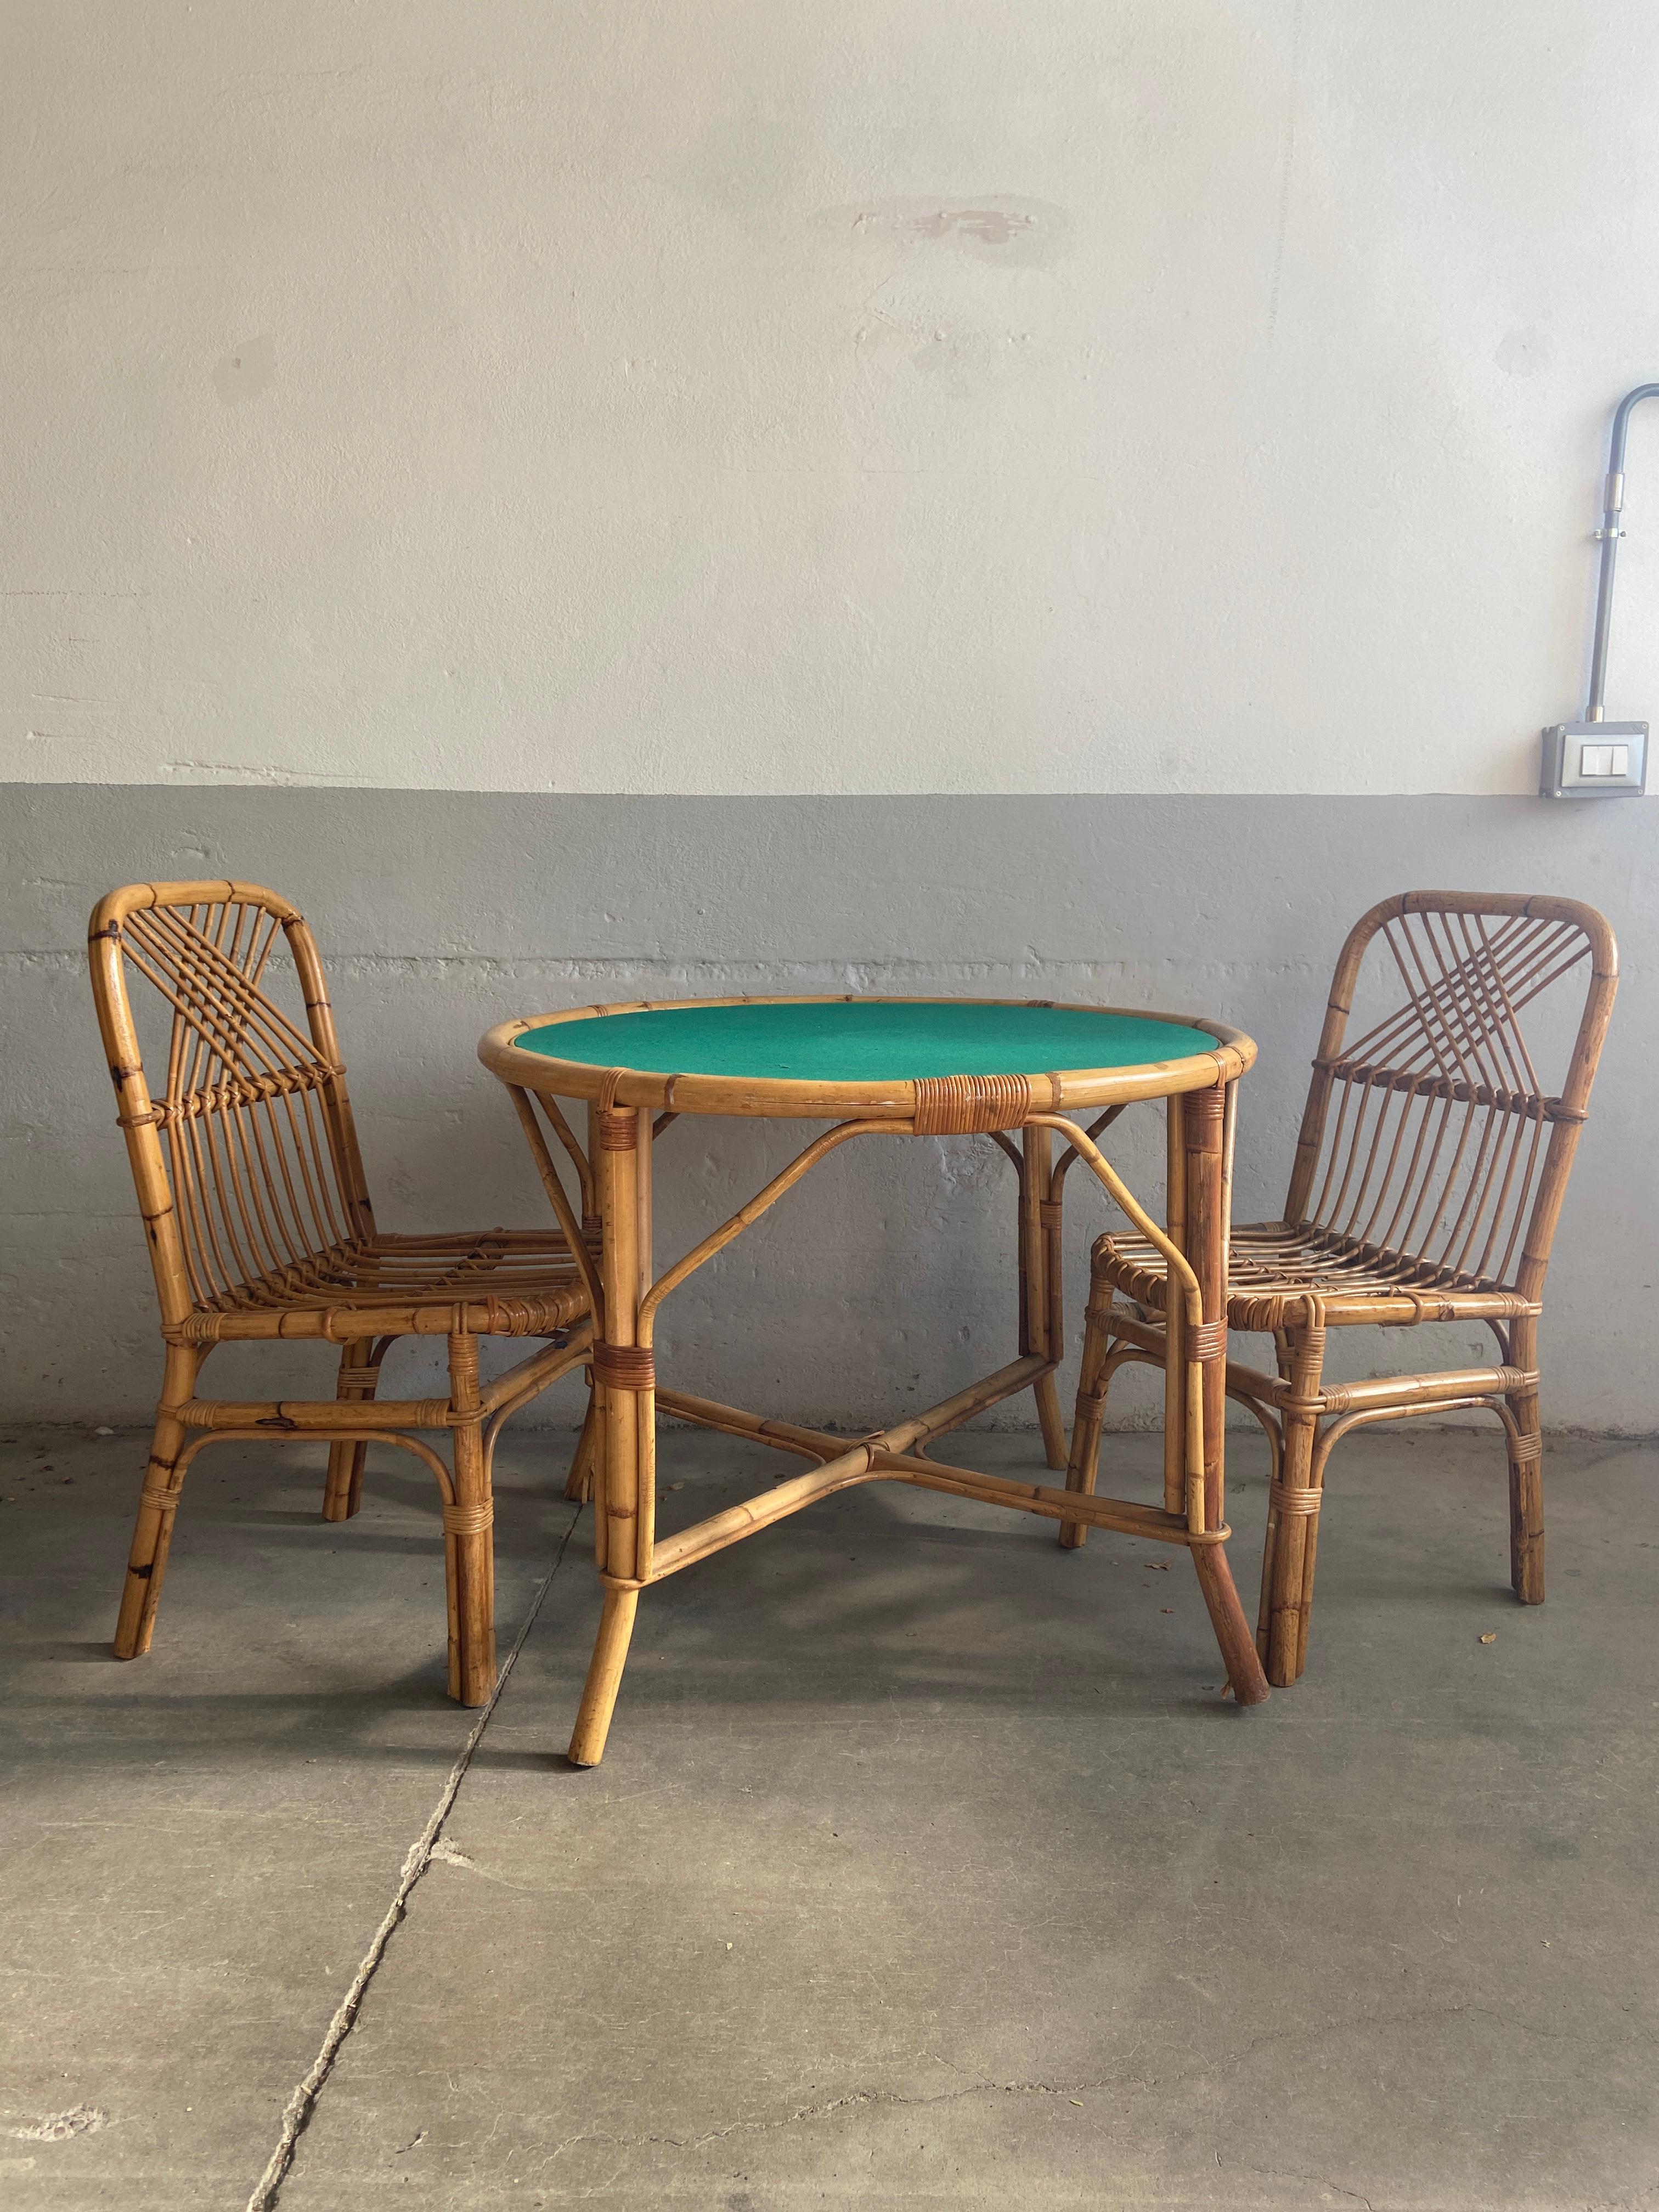 Mid-Century Modern Italian Bamboo game table set.
The Table top with green cloth is endorsable to become a normal dining table equipped with two bamboo seats.
The set presents some signs due to age and use; cost for restoration on